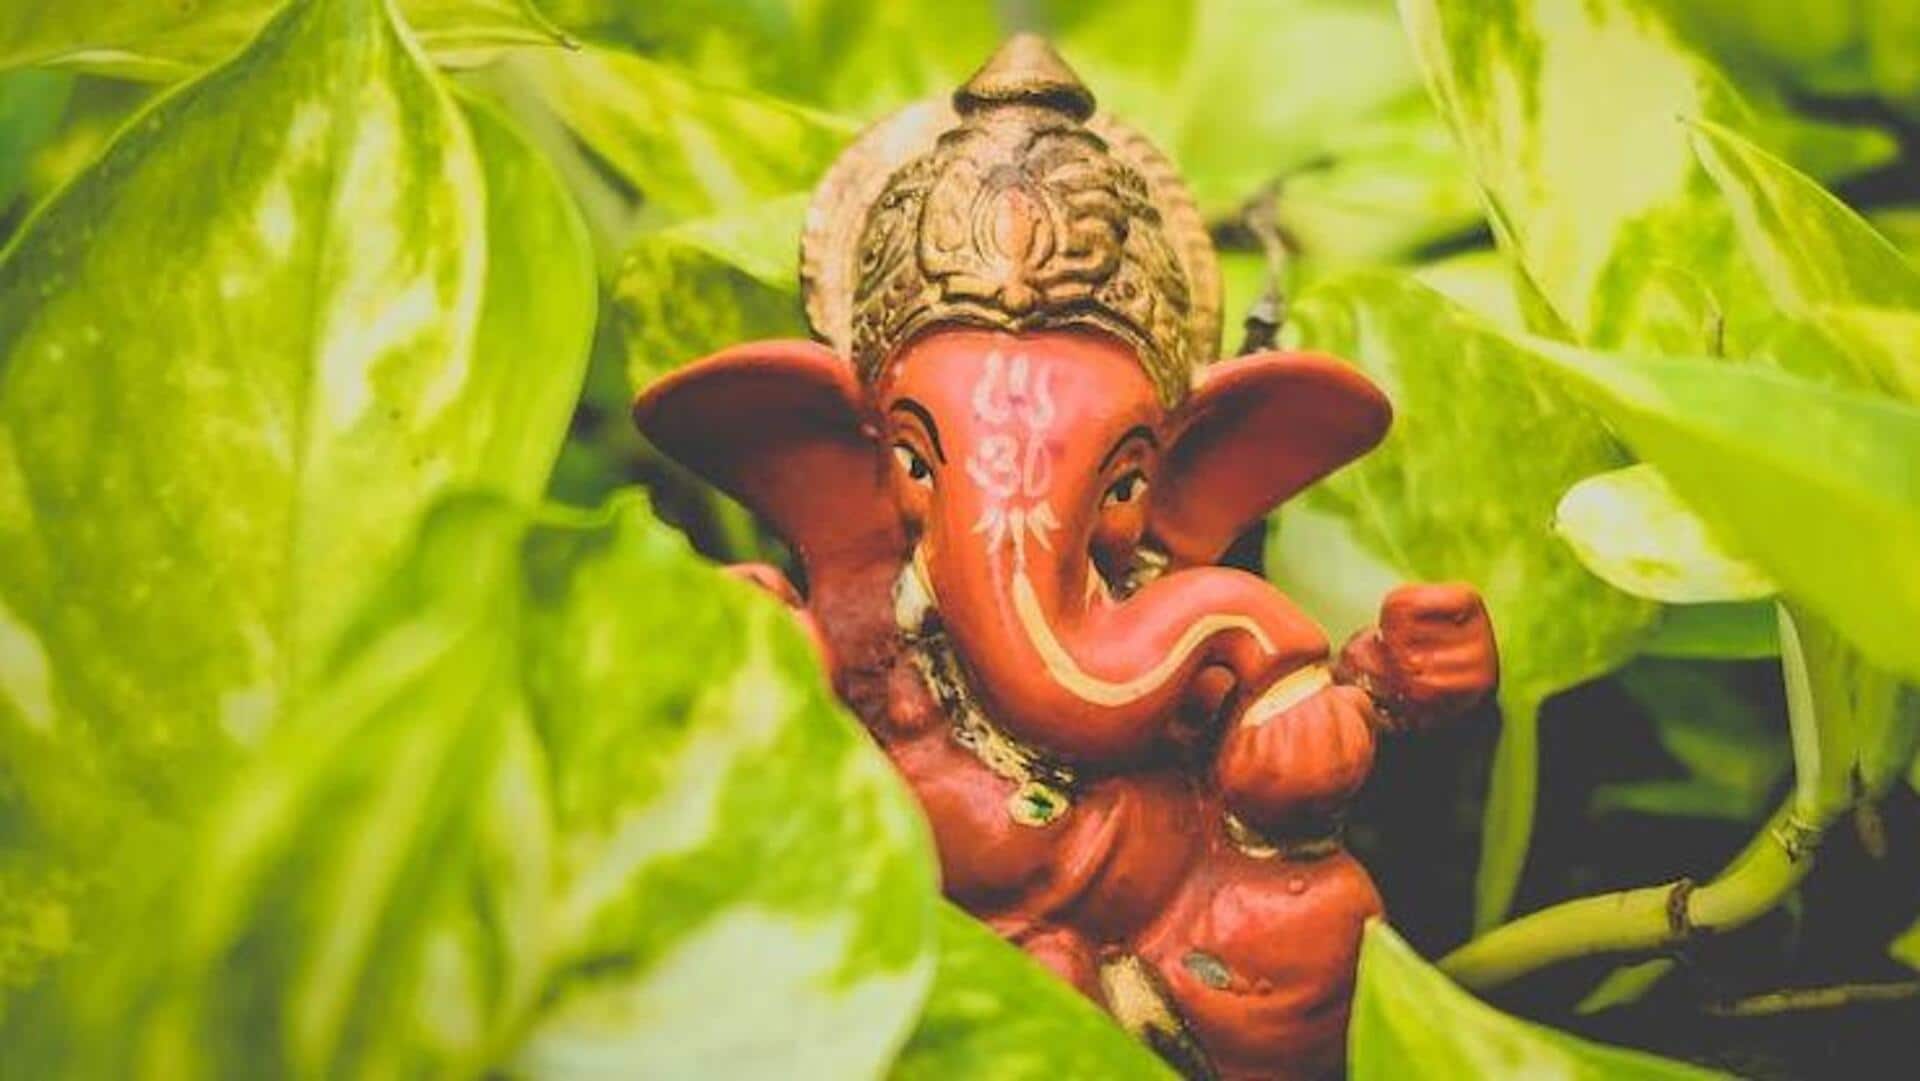 Ganesh Chaturthi: 5 lesser-known facts about Lord Ganesha